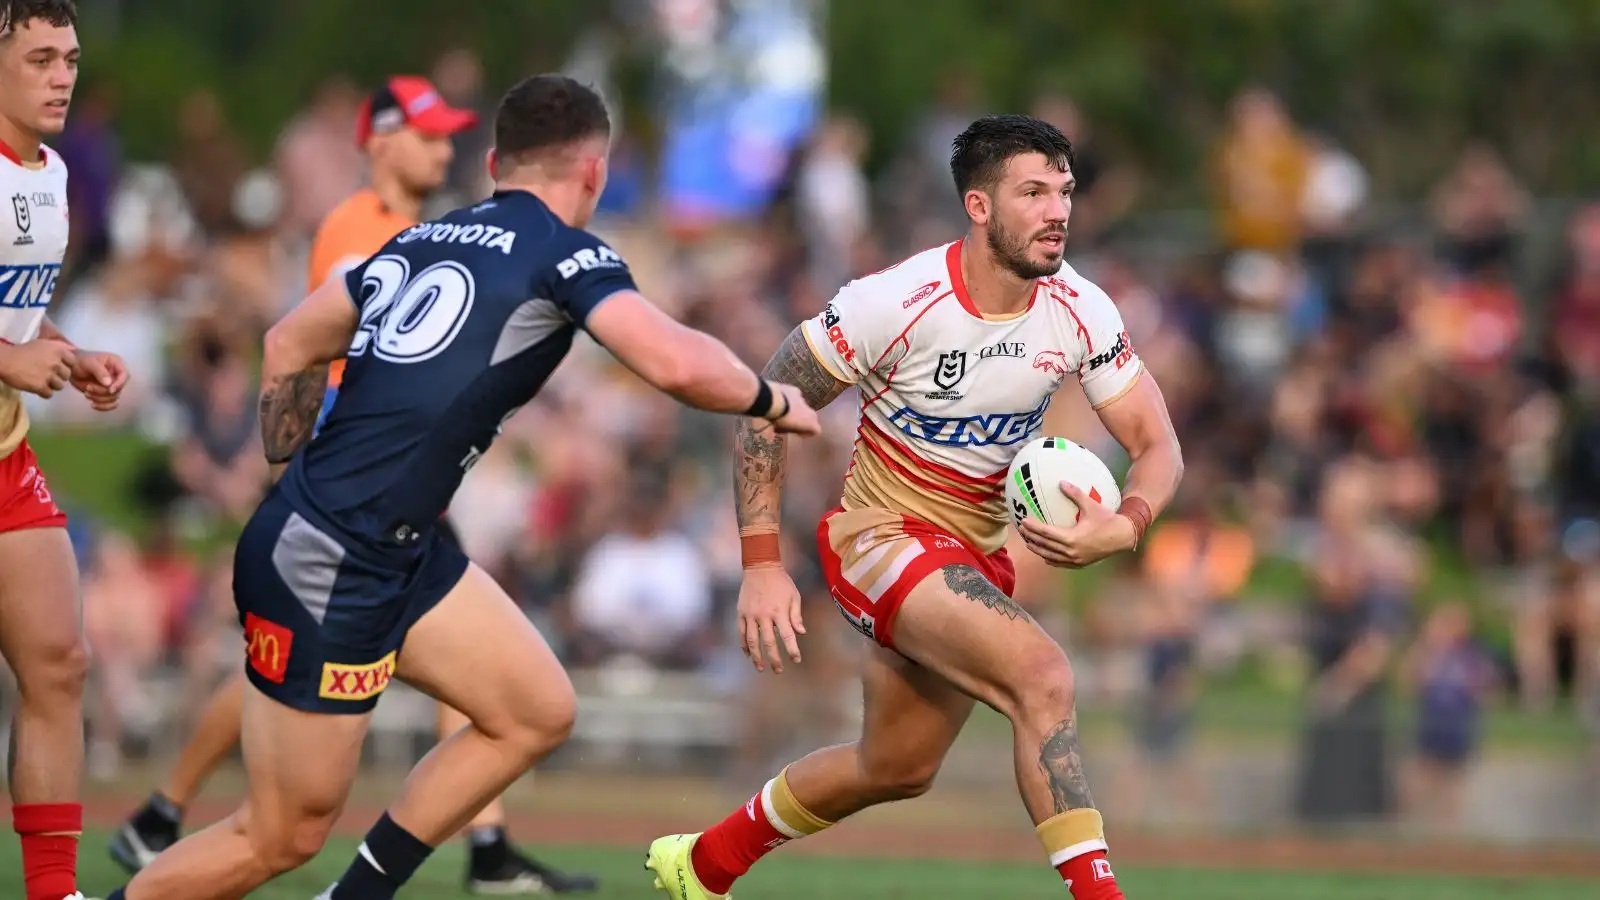 Oliver Gildart immediate Super League return confirmed on short-term contract ahead of Hull KR move